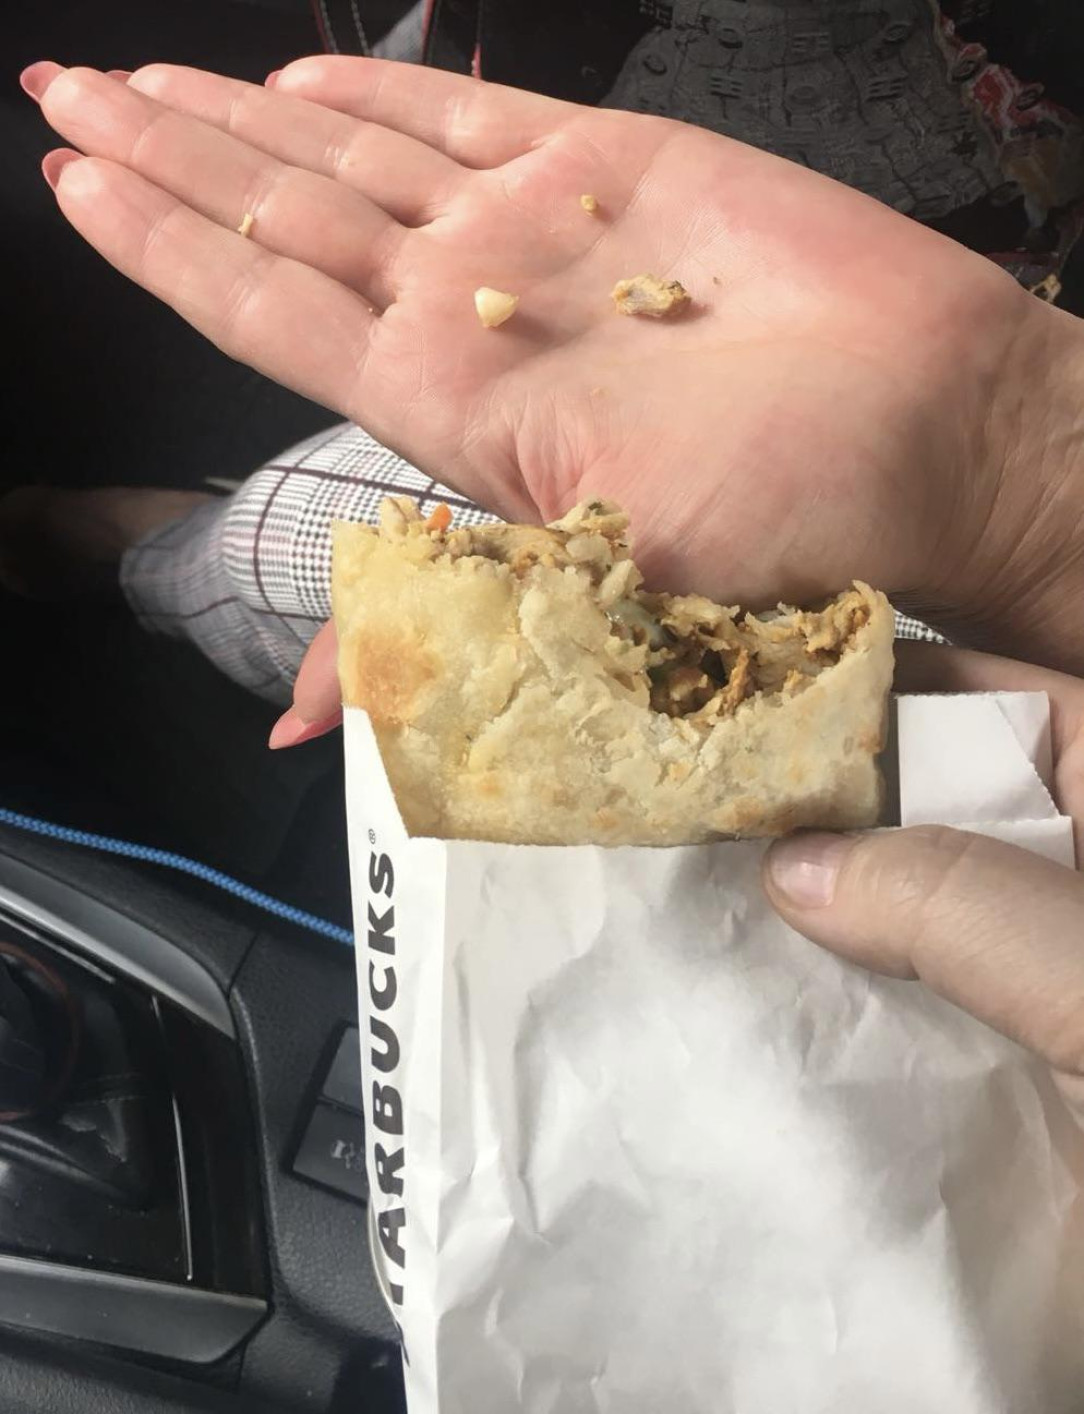 Mom broke her tooth after biting a Starbucks sandwich. Turns out there was a bone in the sandwich